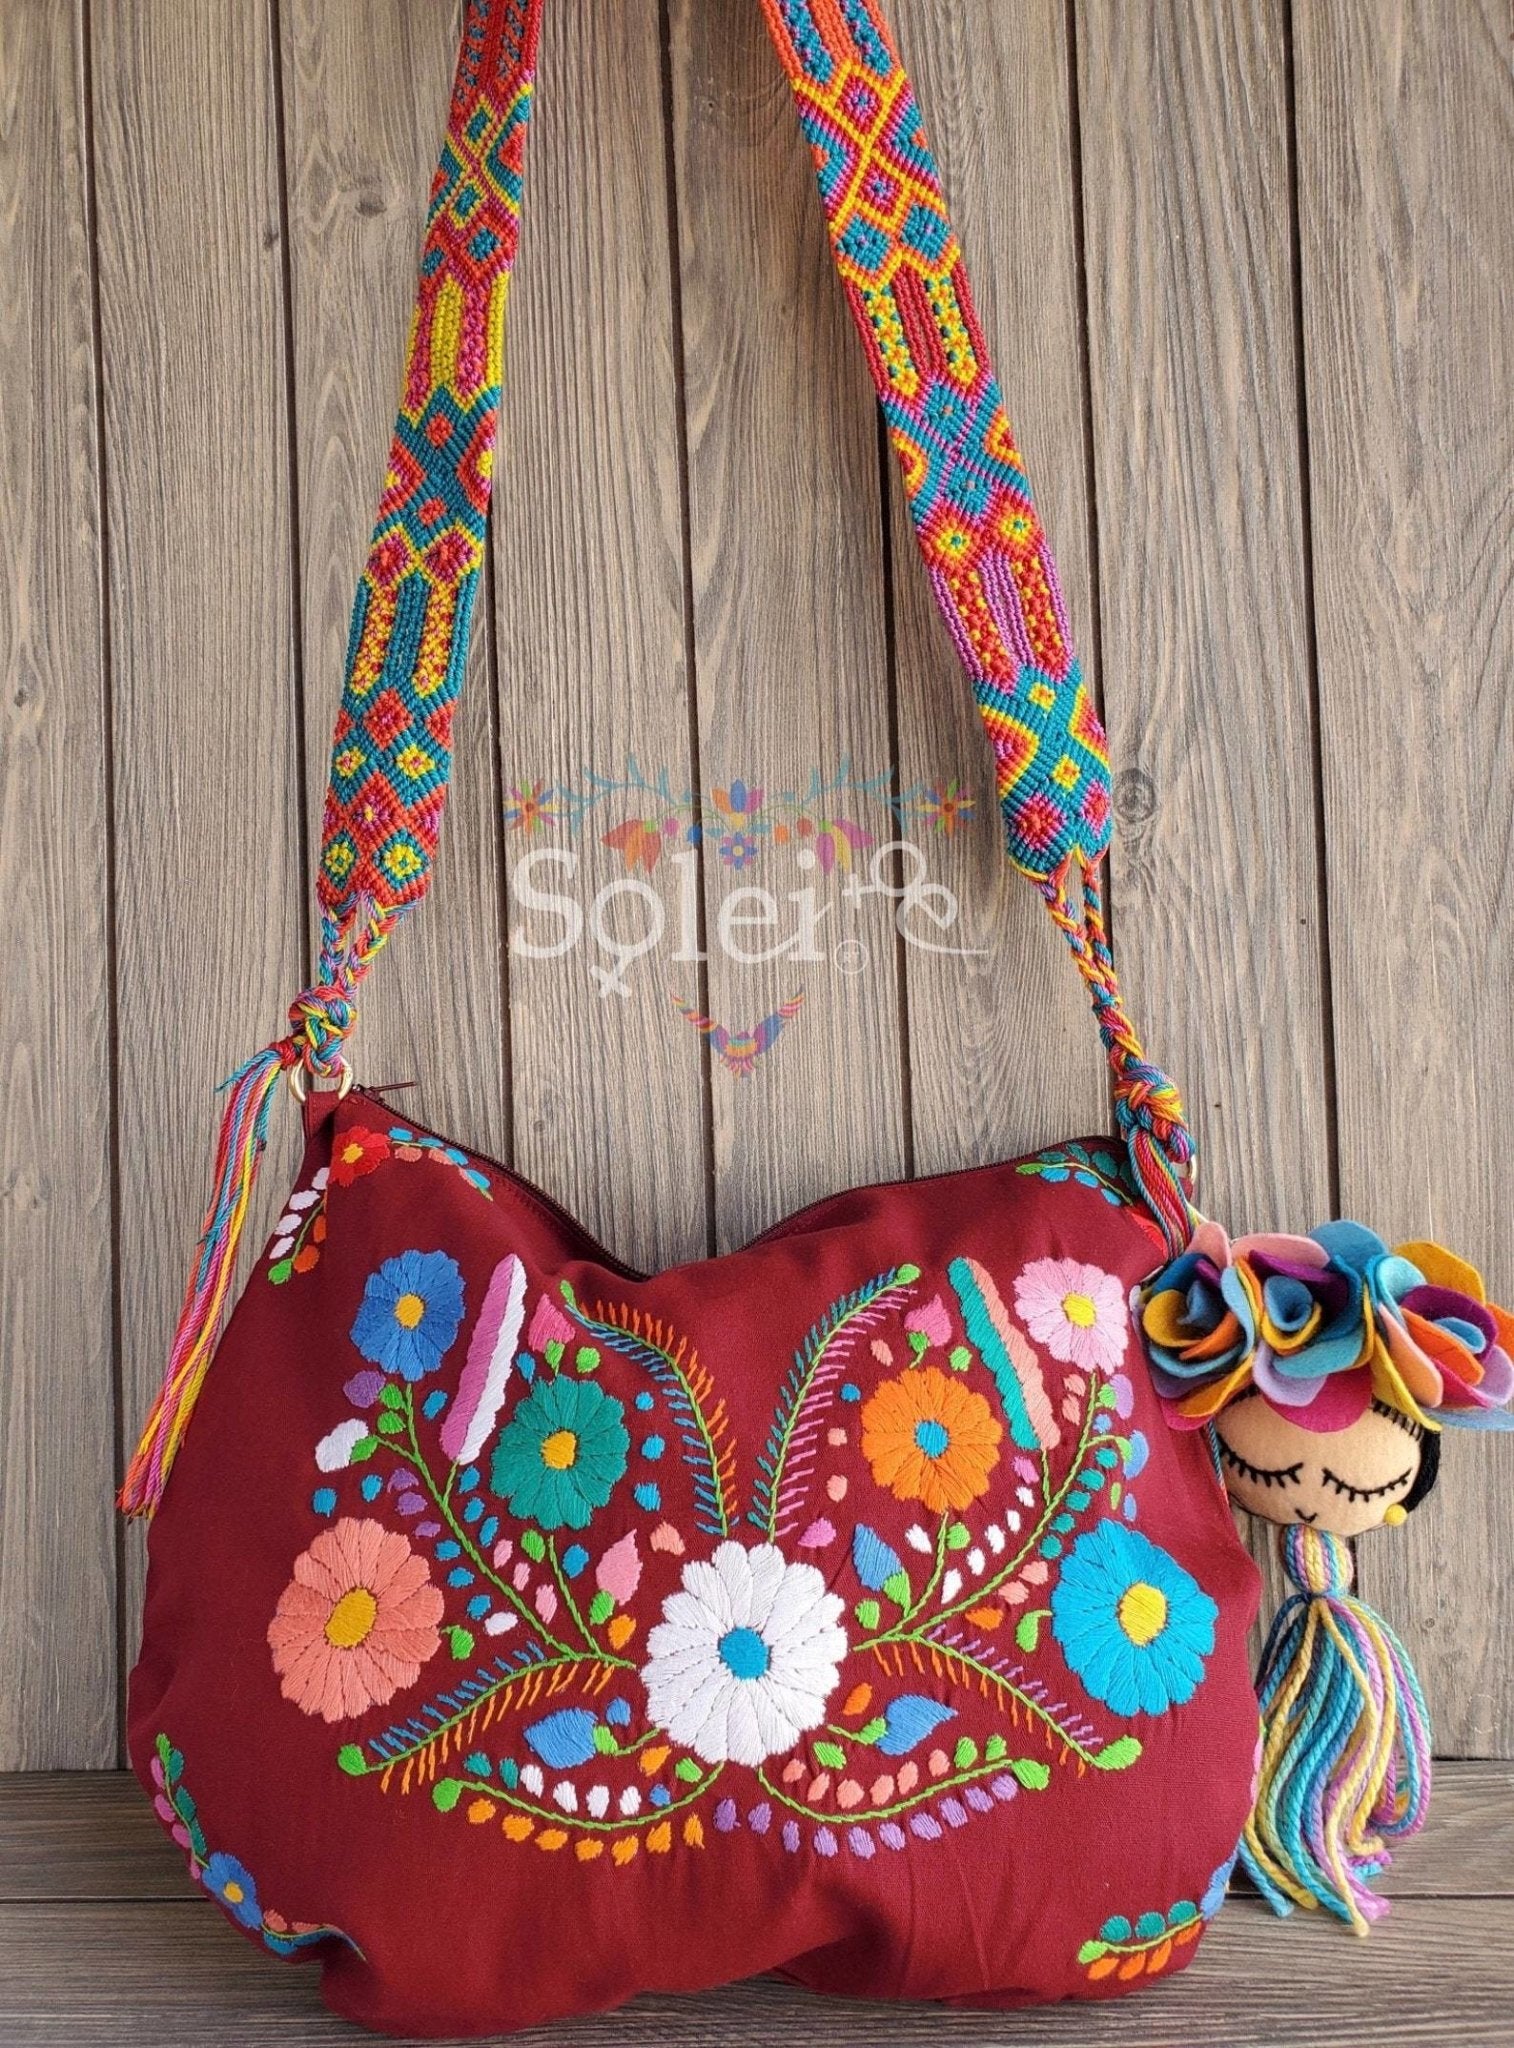 Traditional Mexican Embroidered Bag with Frida Kahlo Tassel. Morral Tehuacan with Frida Kahlo Tassel - Solei Store